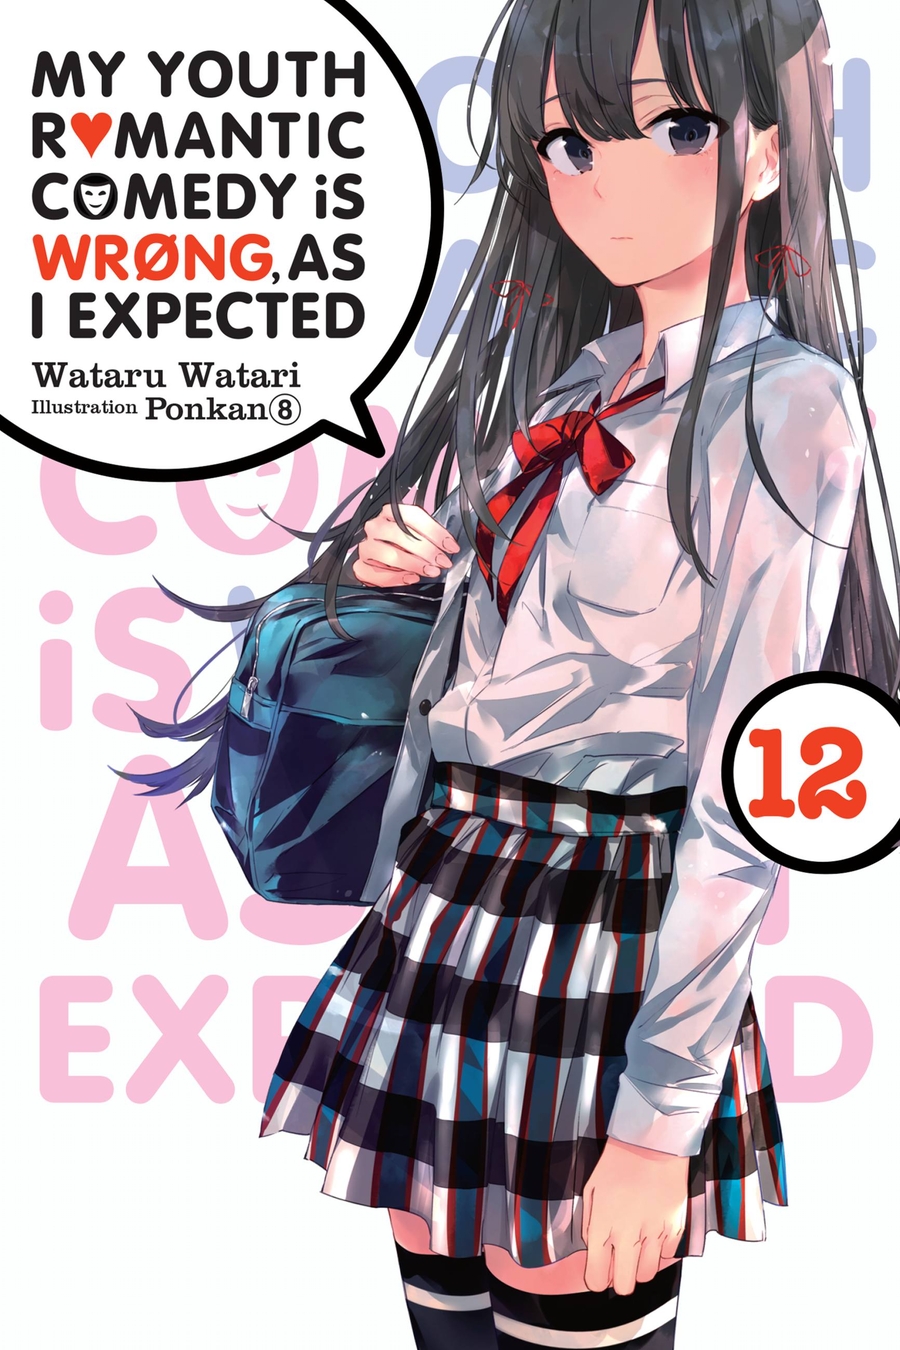 My Youth Romantic Comedy Is Wrong, As I Expected, Vol. 12 by Wataru Watari